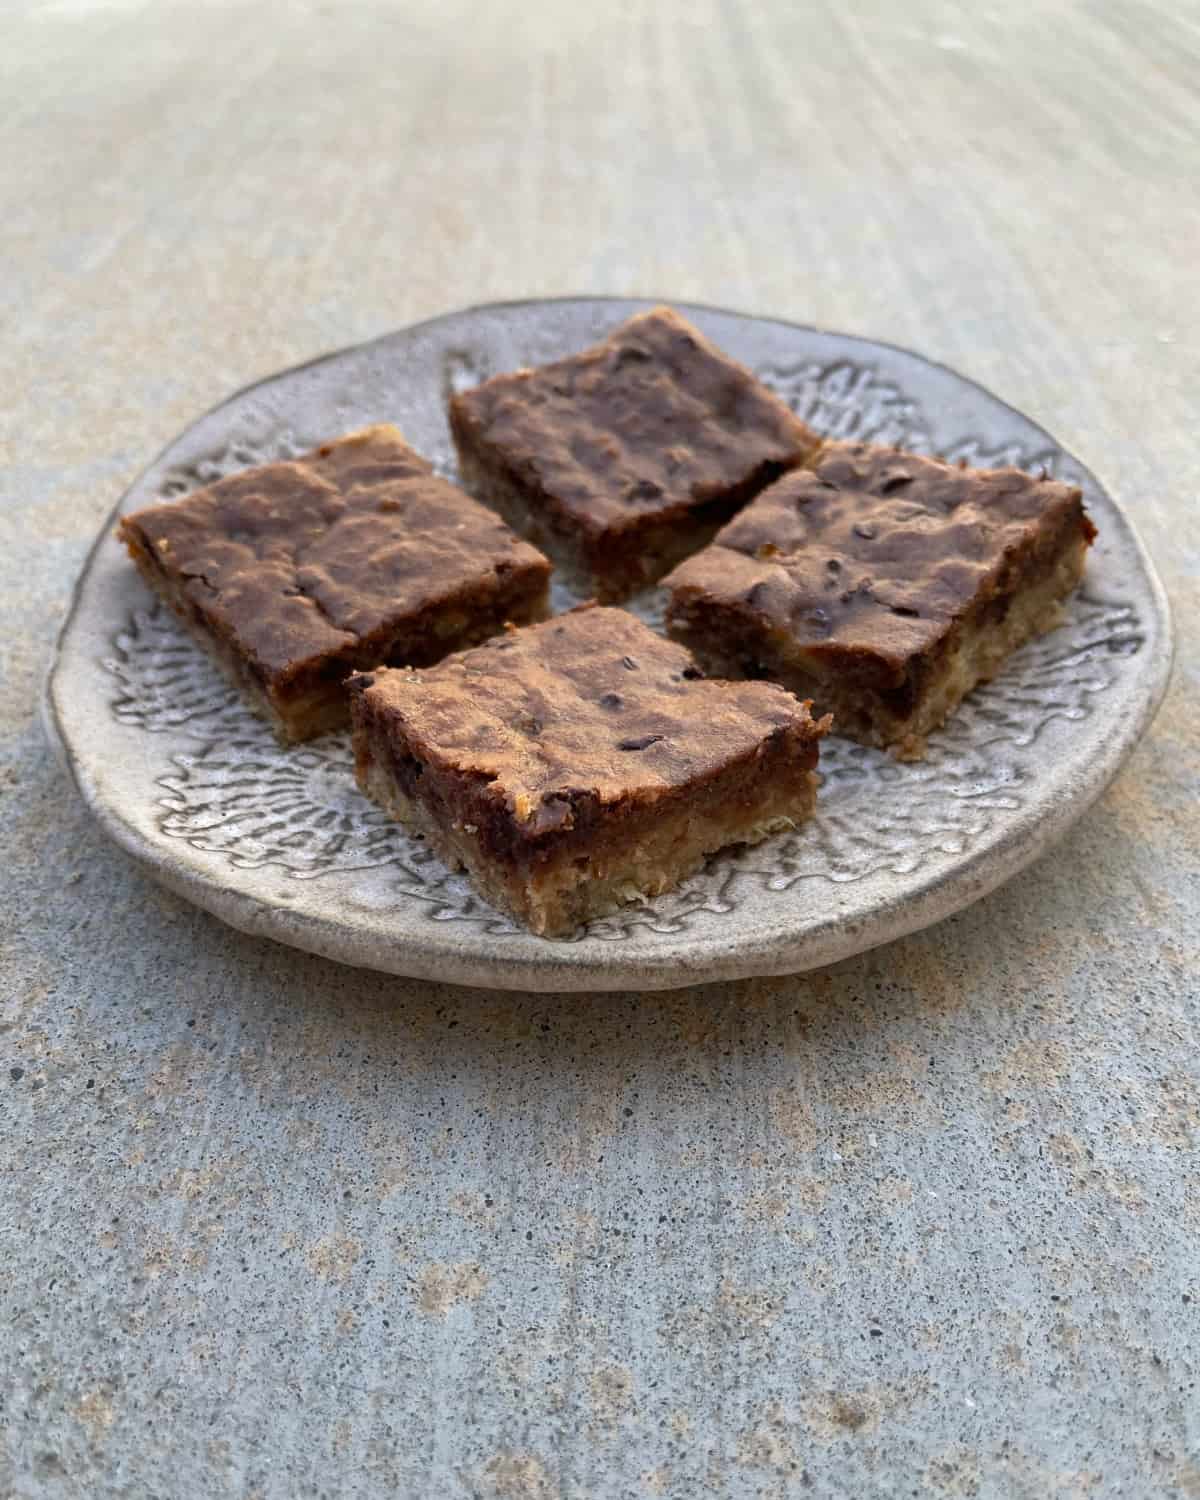 Four banana bread brownies on ceramic plate.